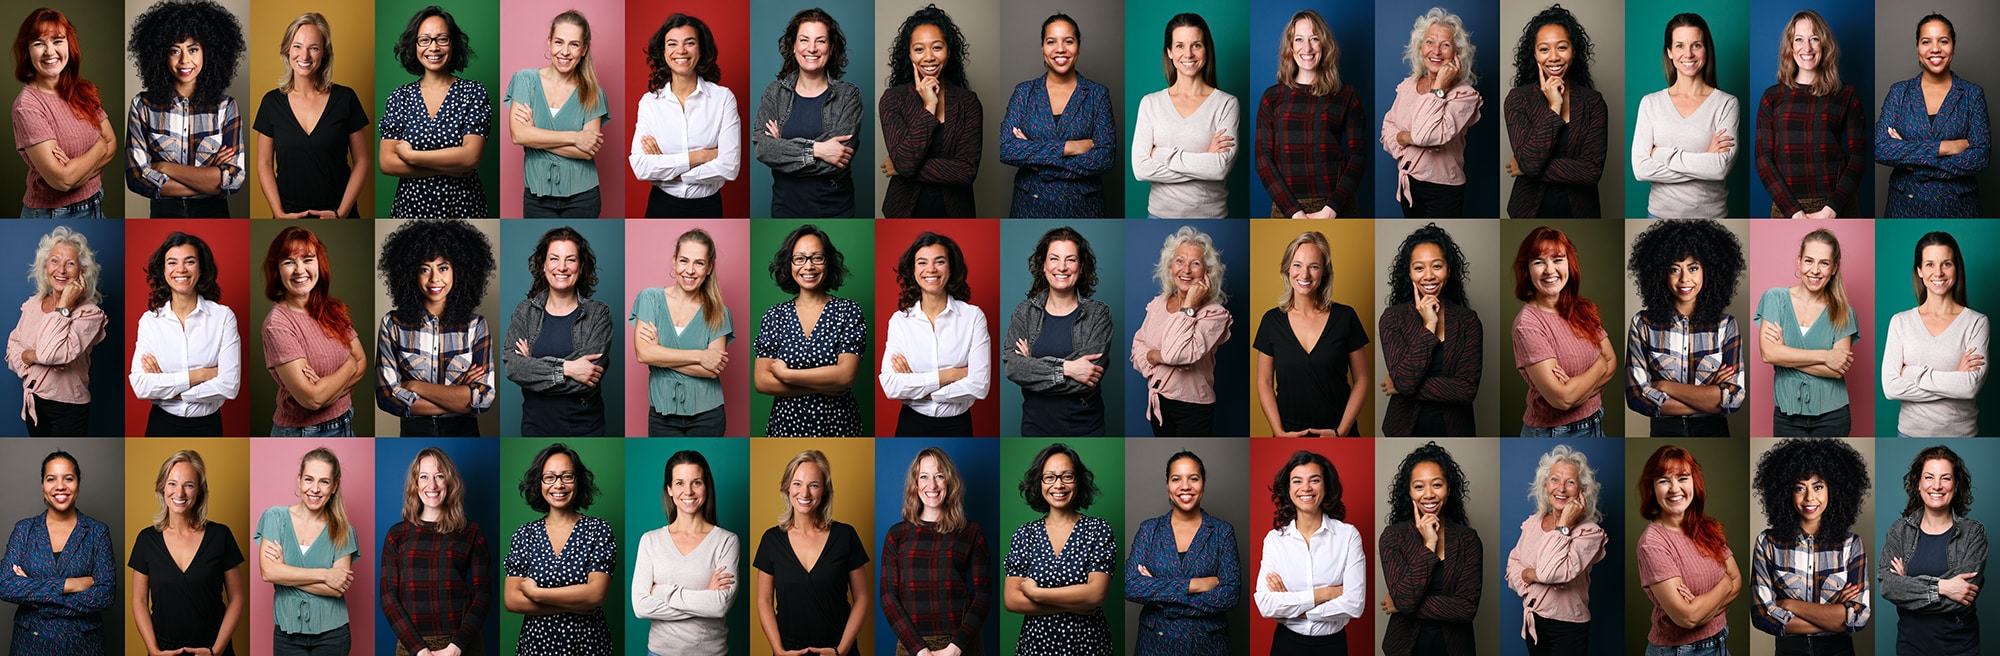 Portraits of 12 beautiful commercial powerfull women